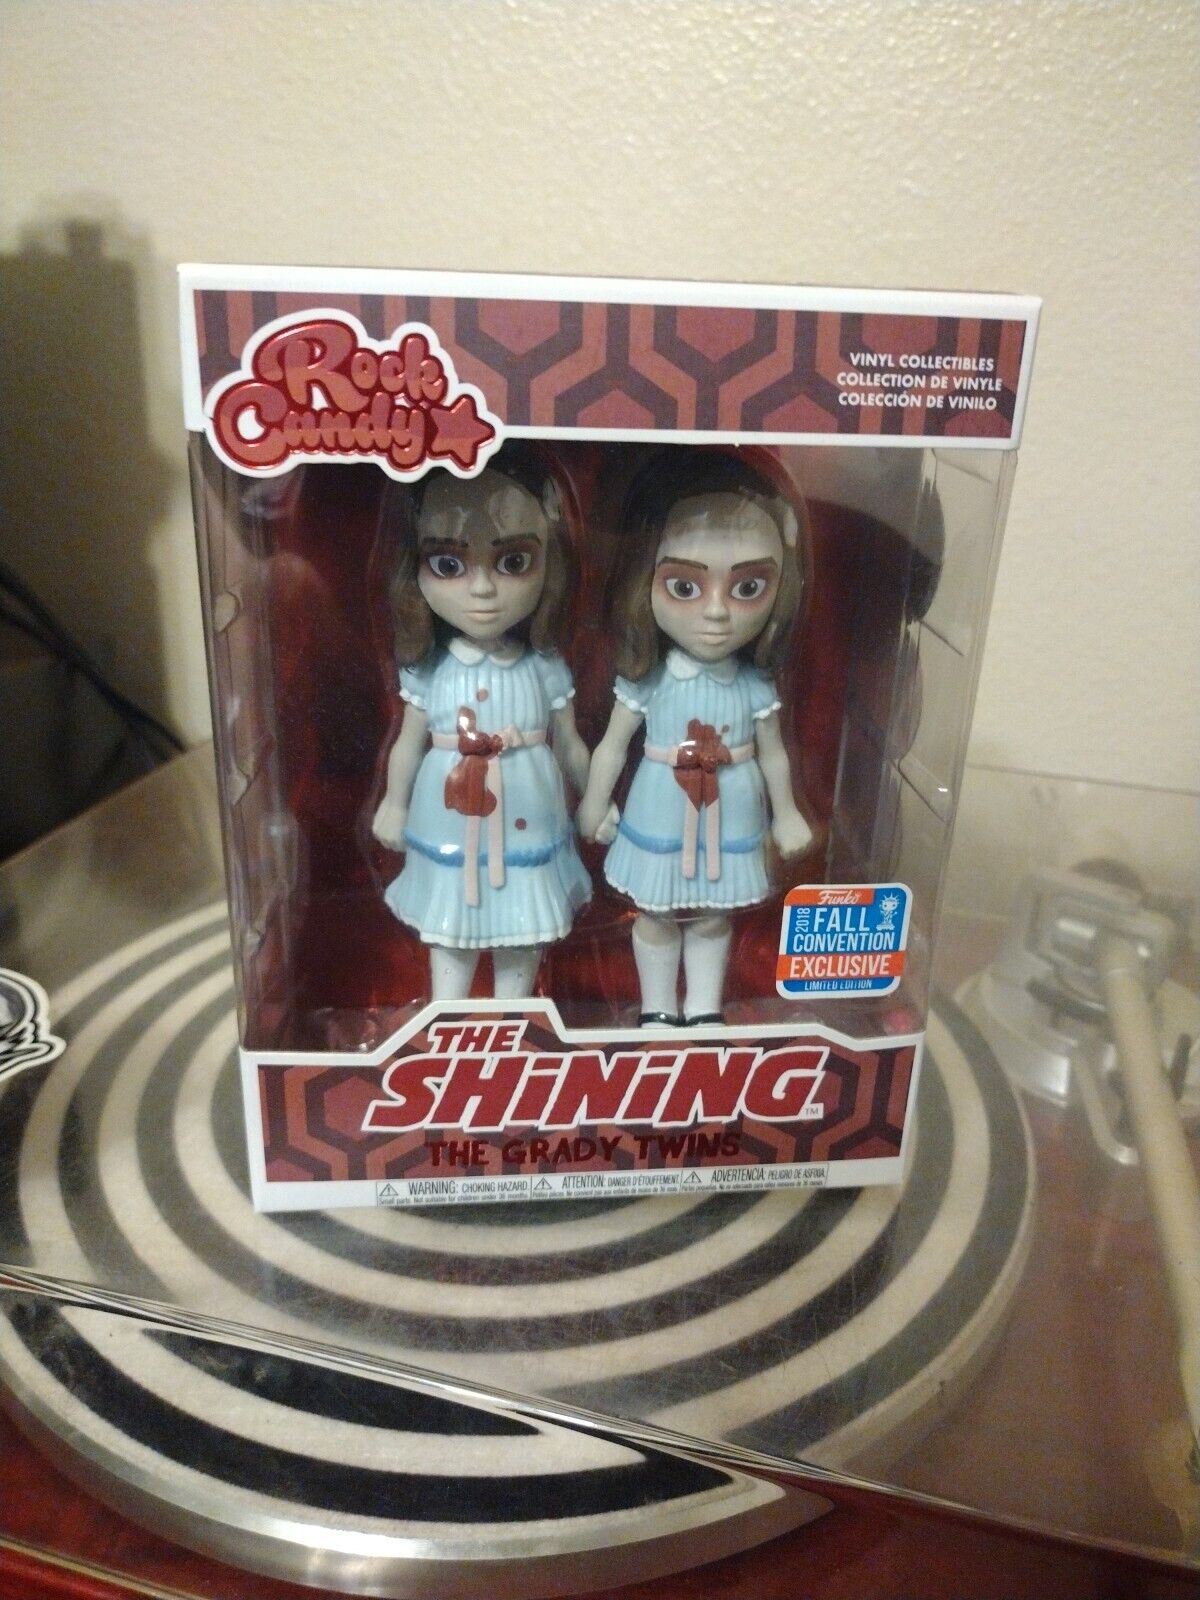 FUNKO ROCK CANDY THE SHINING THE GRADY TWINS NYCC 2018 SHARED TARGET EXCLUSIVE